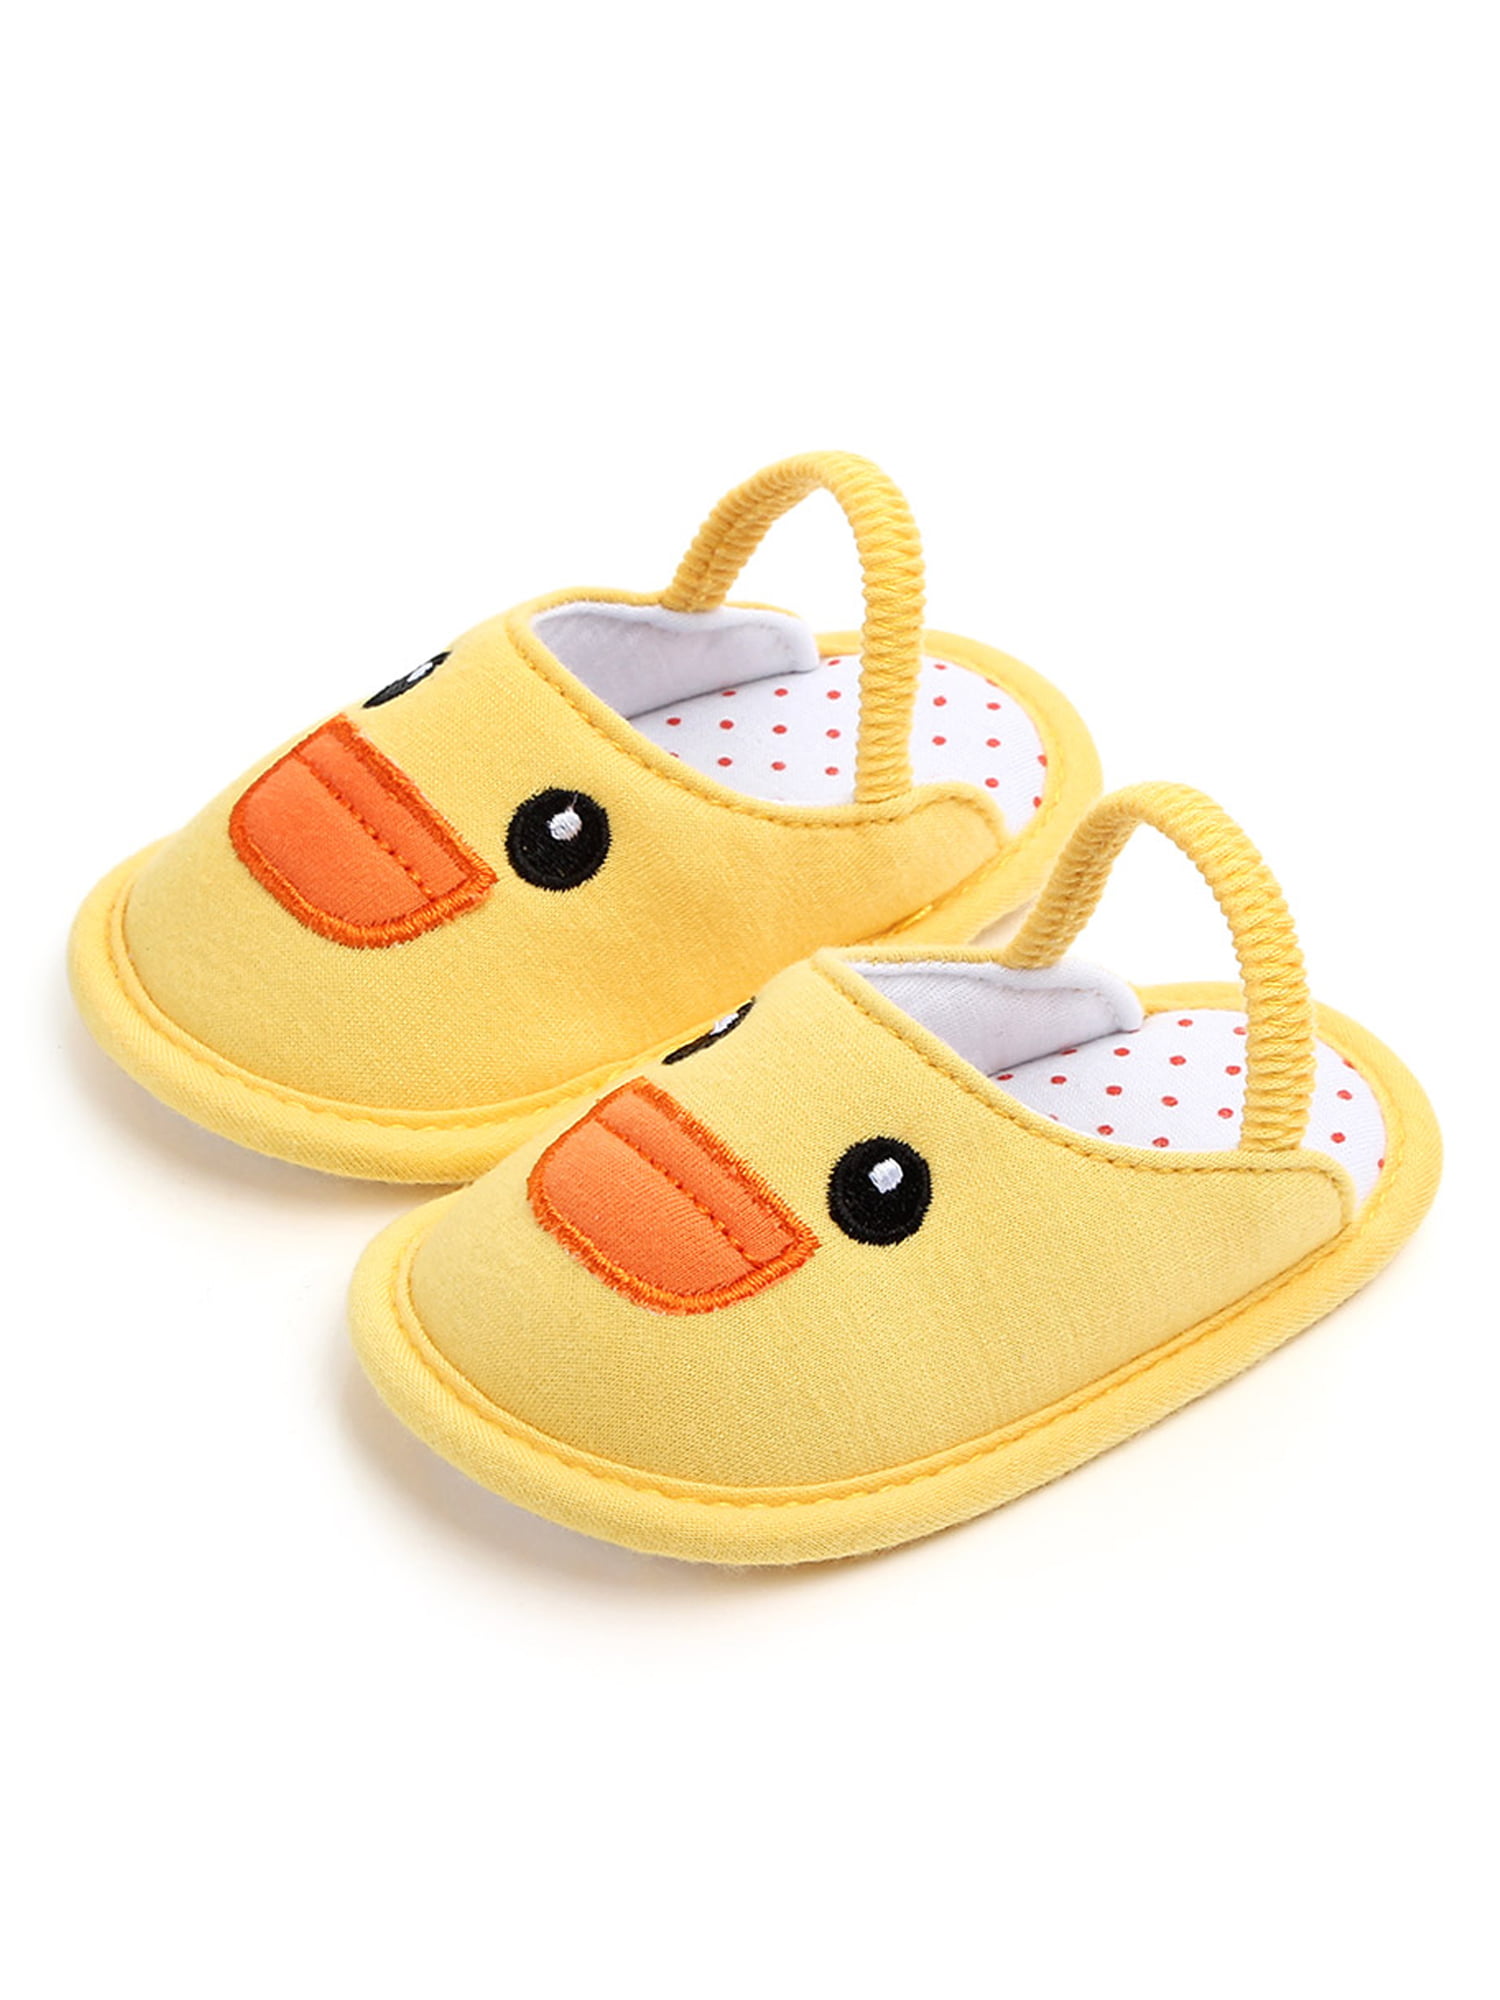 Age:0~6 Month, Brown Baby Sandals,AutumnFall Toddler Baby Boys Girls Crib Shoes Newborn Soft Sole Anti-slip Cotton First Walkers